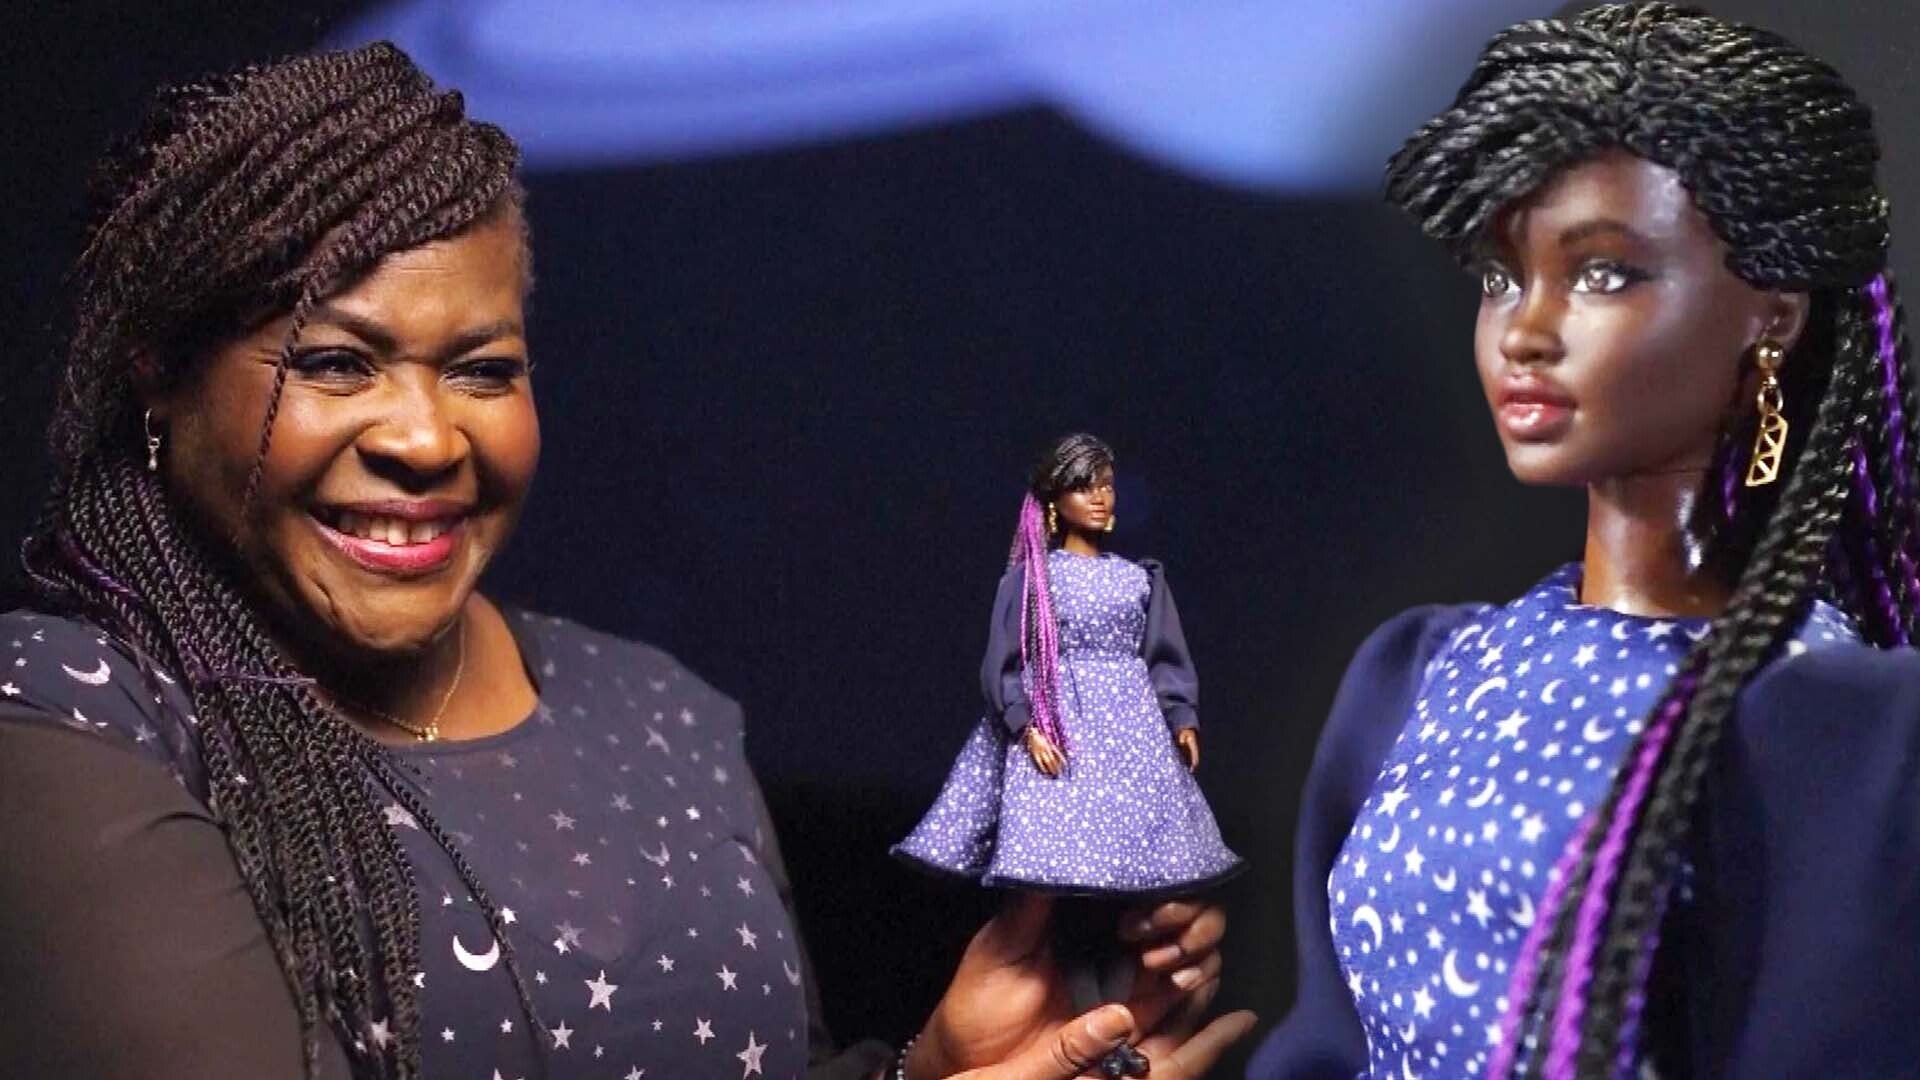 Dr Maggie Aderin Pocock Honored With Out Of This World Barbie Doll Inside Edition 8083